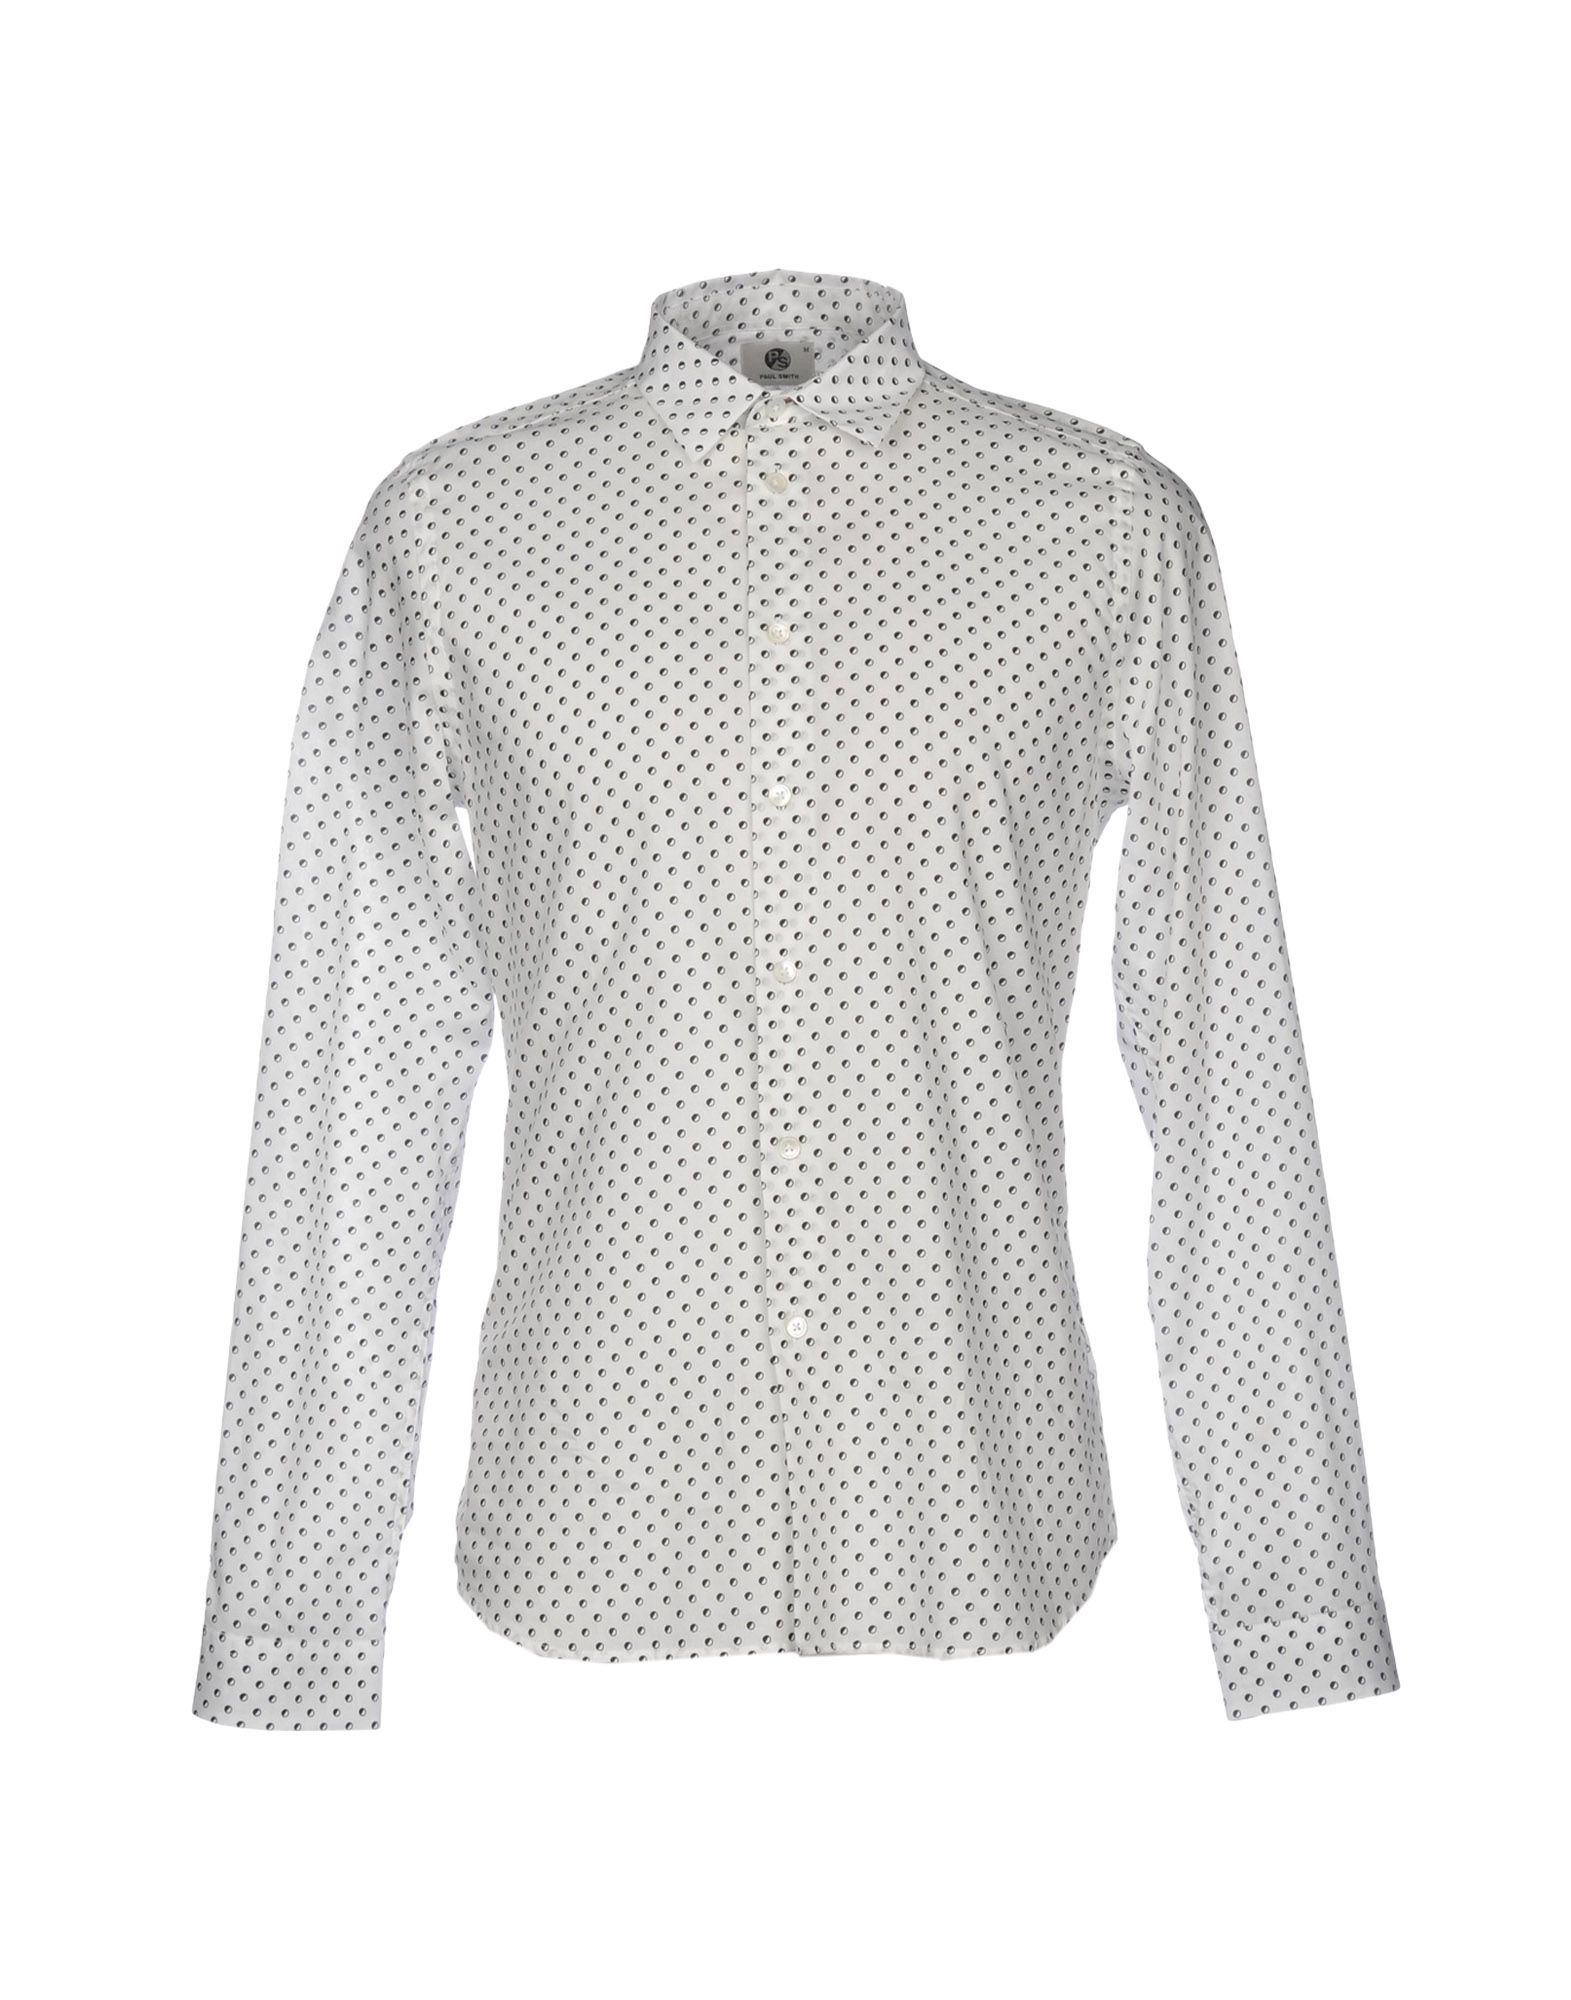 PS BY PAUL SMITH SHIRTS,38755893FR 4